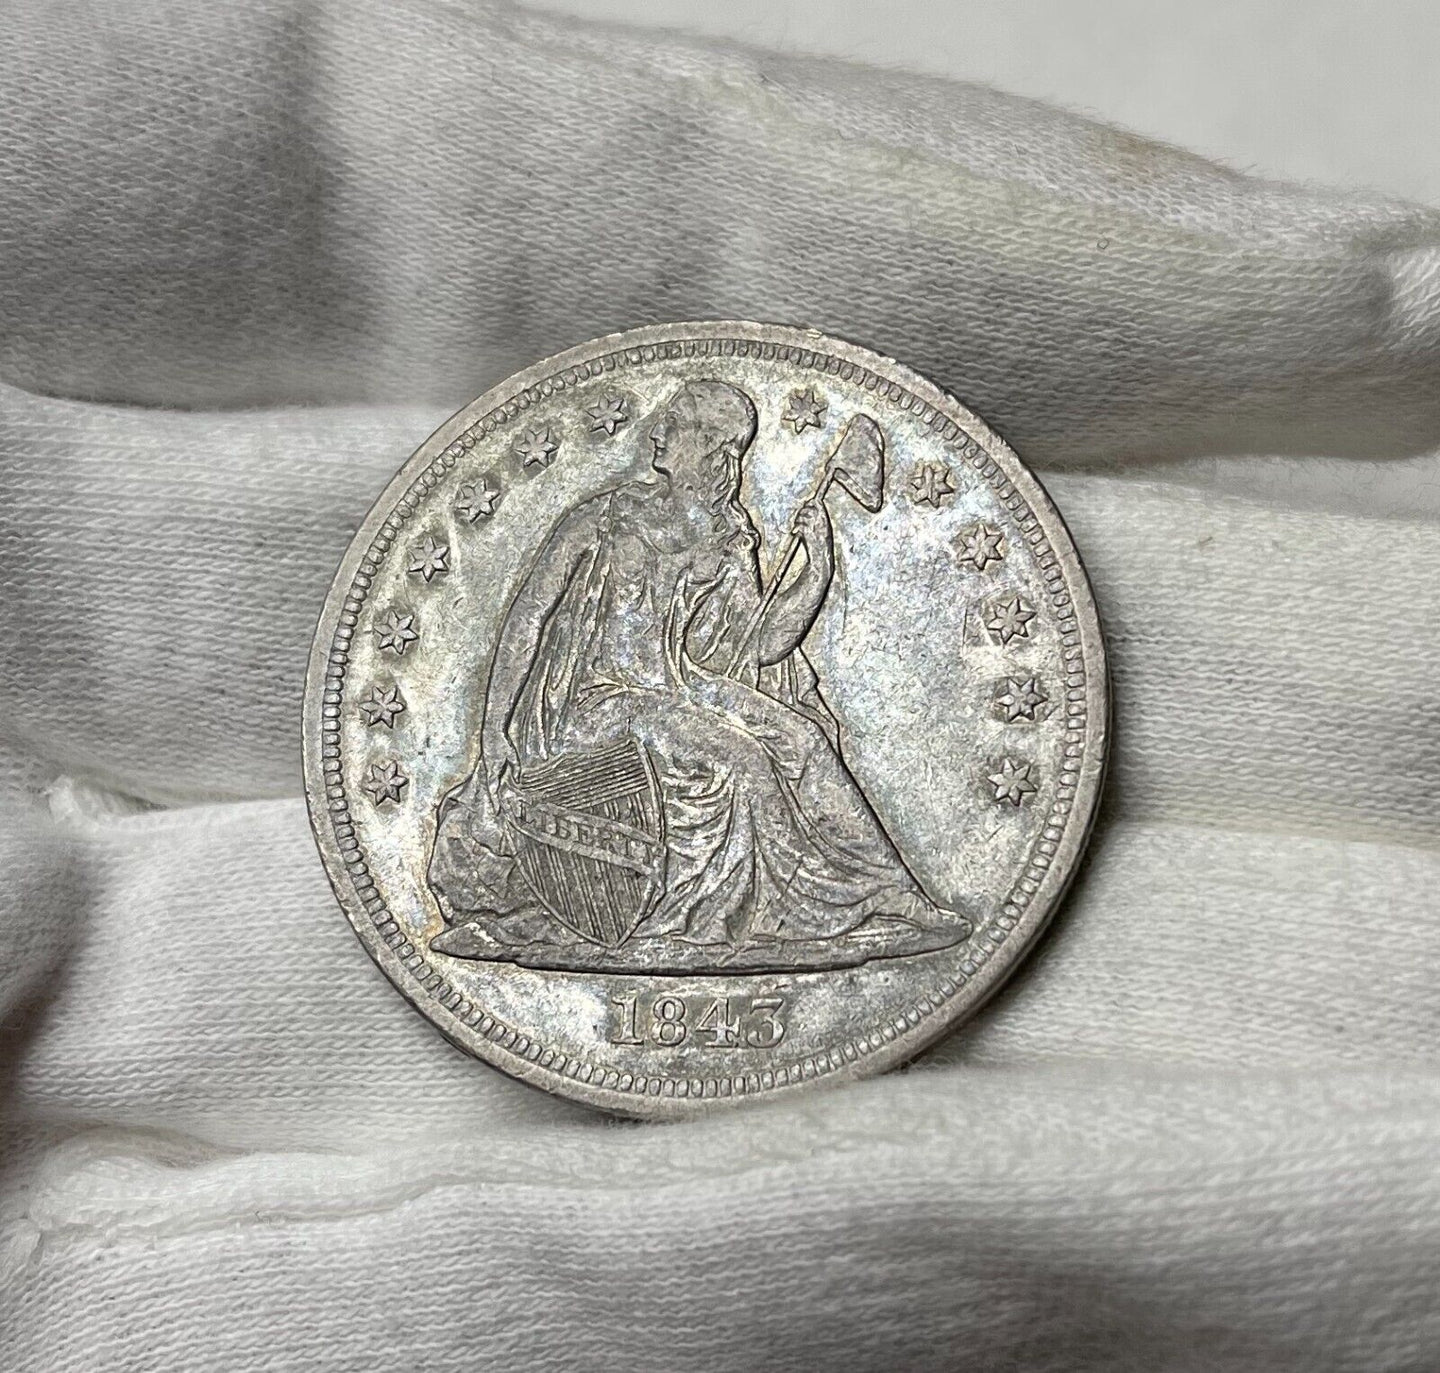 1843 Seated Liberty Silver Dollar - Nice AU+ -Choice Eye Appeal! Tough Type Coin